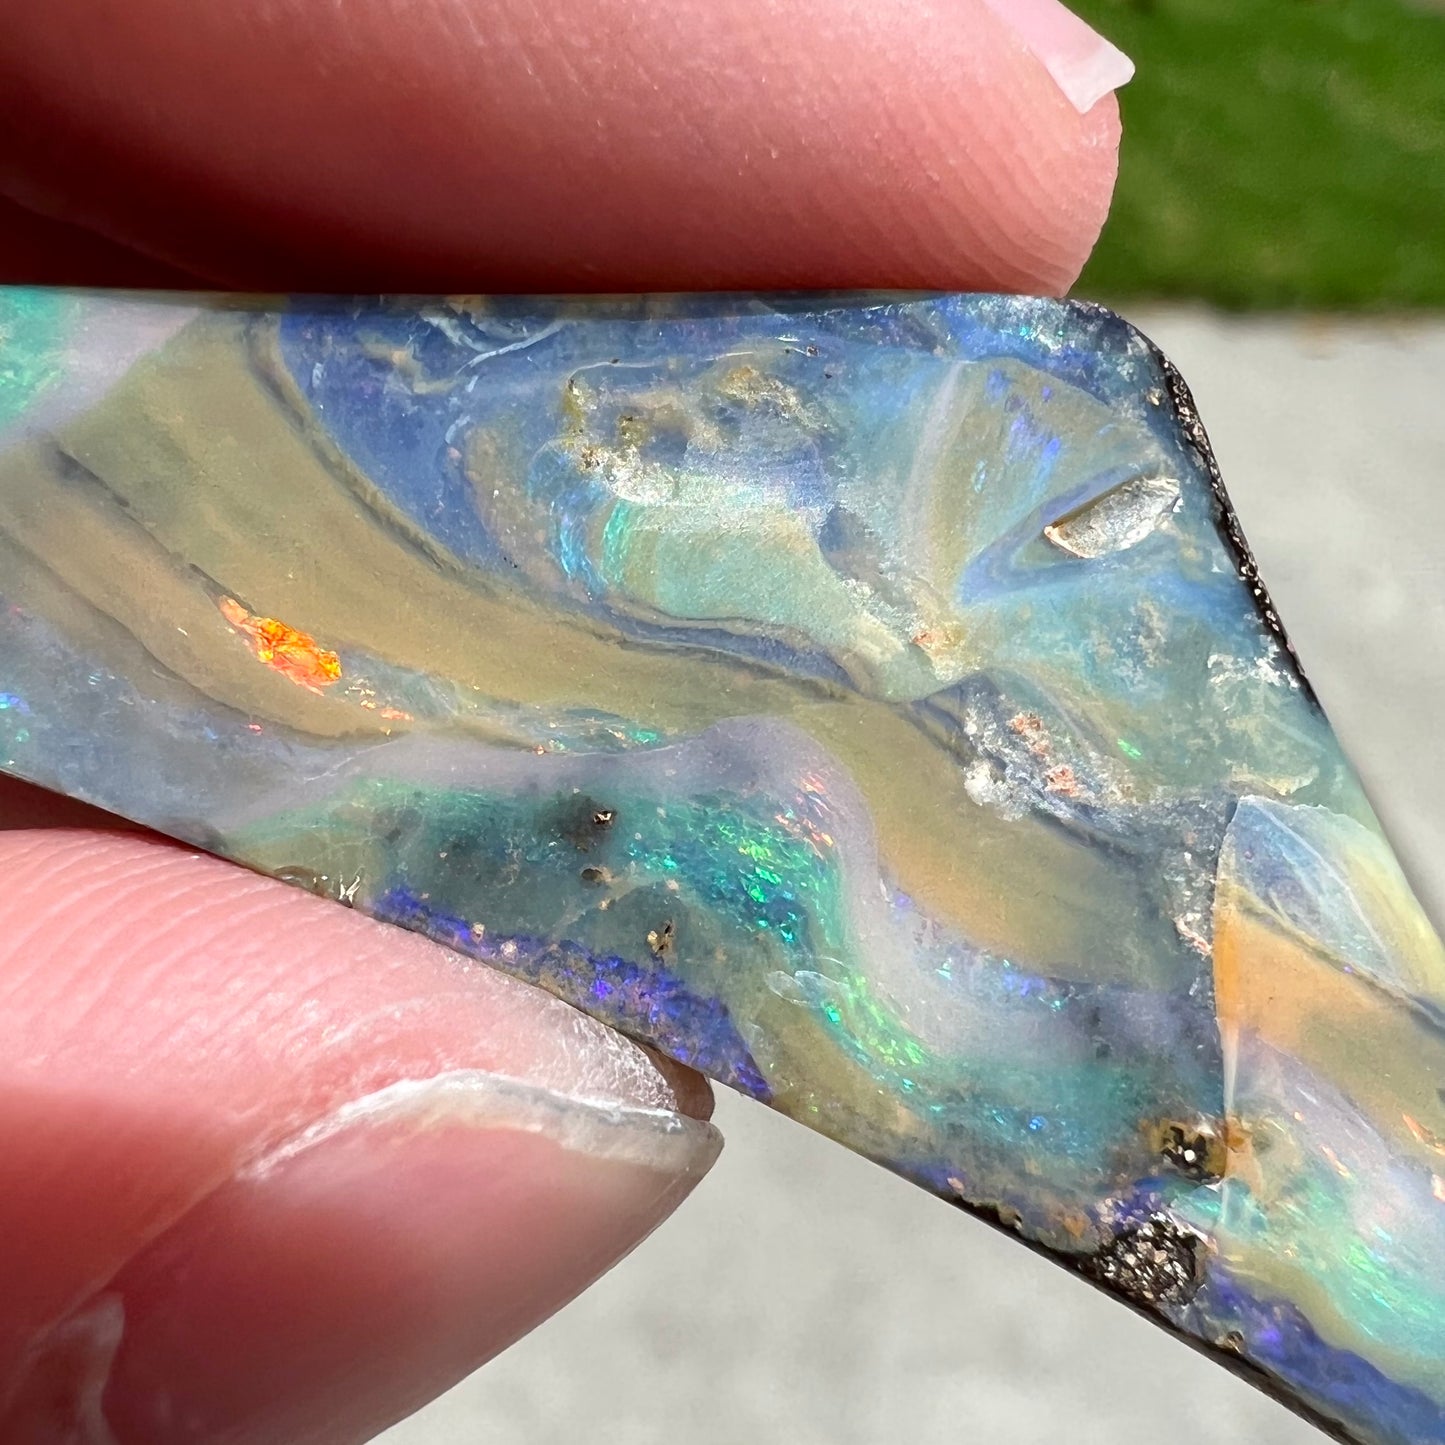 A loose, triangular shaped boulder opal stone from Queensland, Australia.